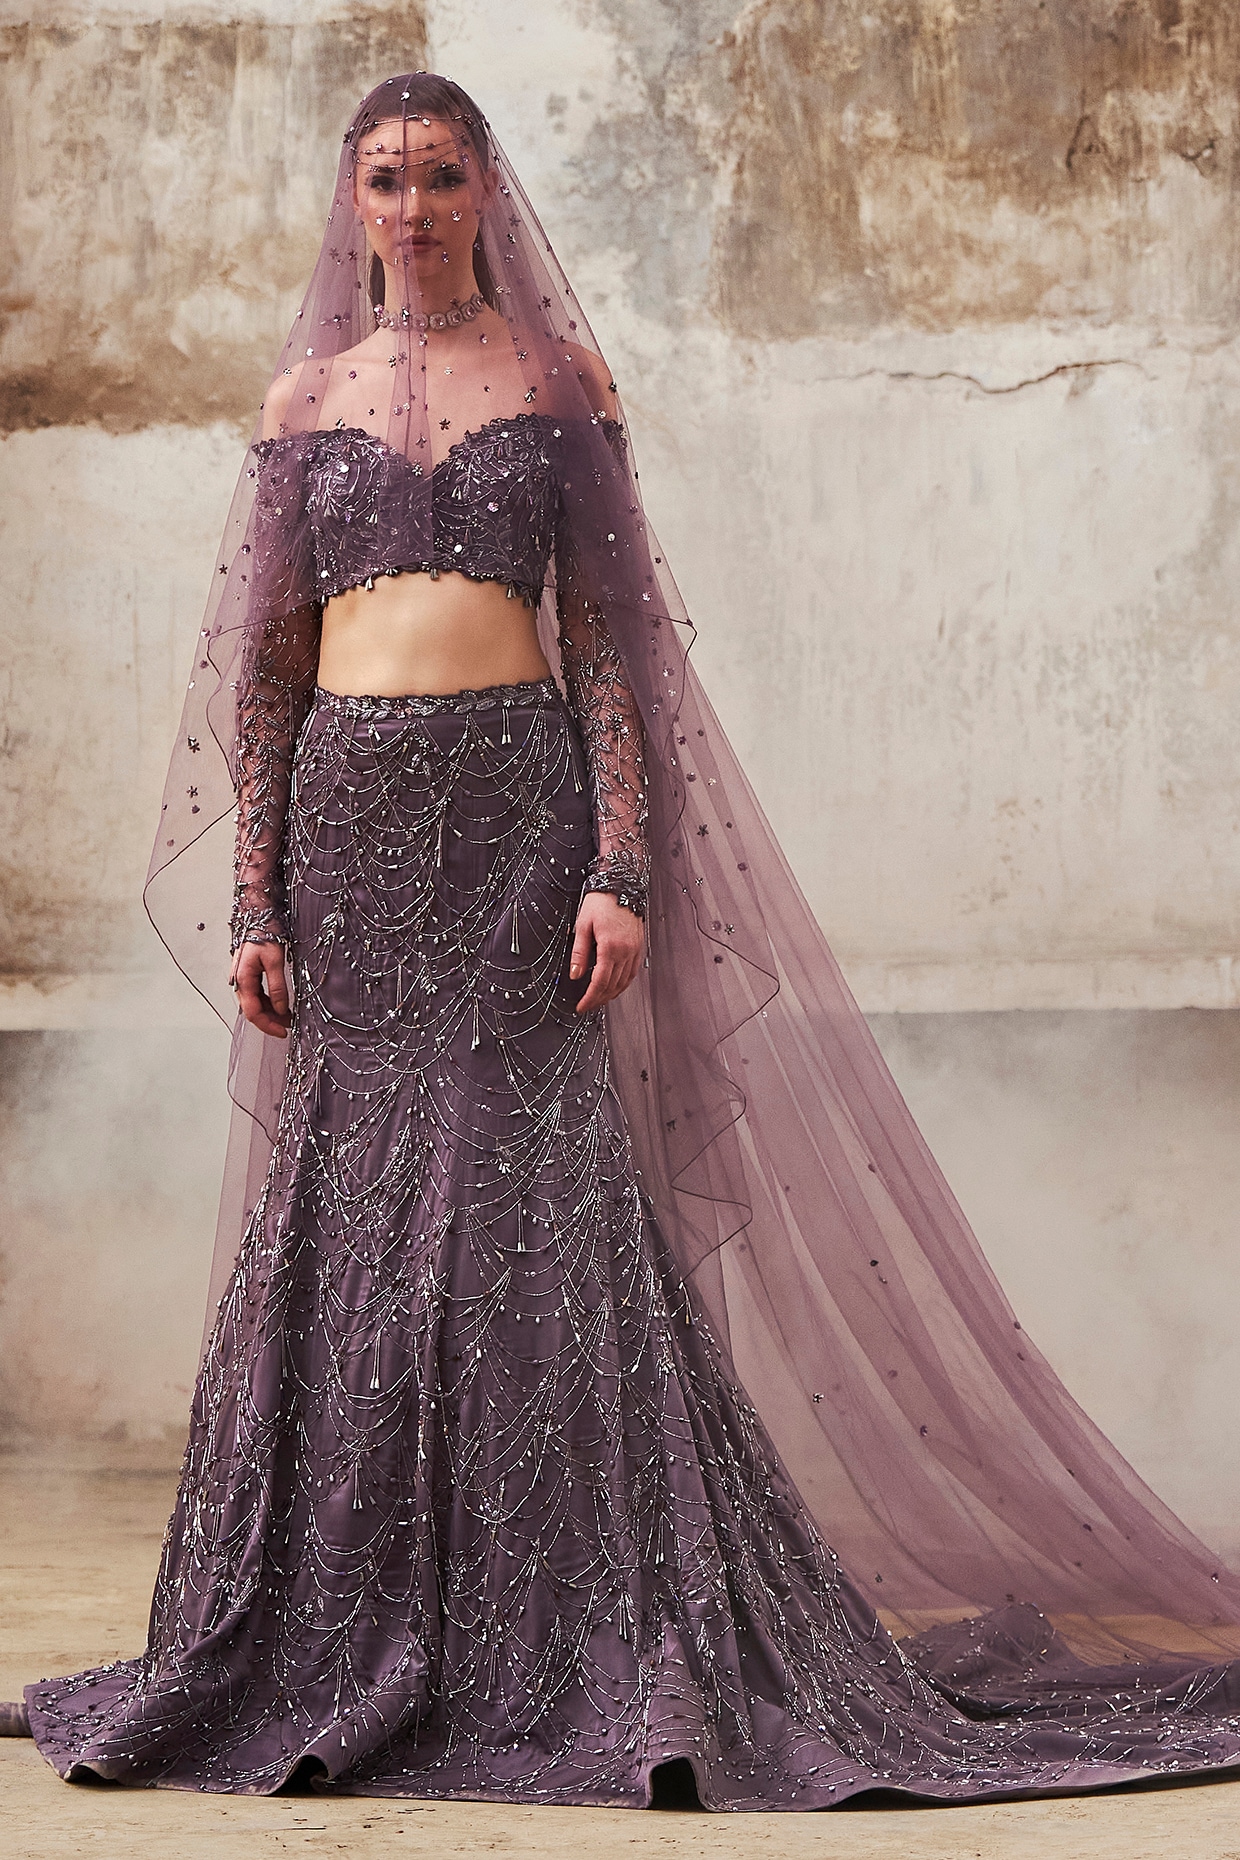 Dazzle any occasion with these GORGEOUS LEHENGAS | Readiprint Fashions Blog